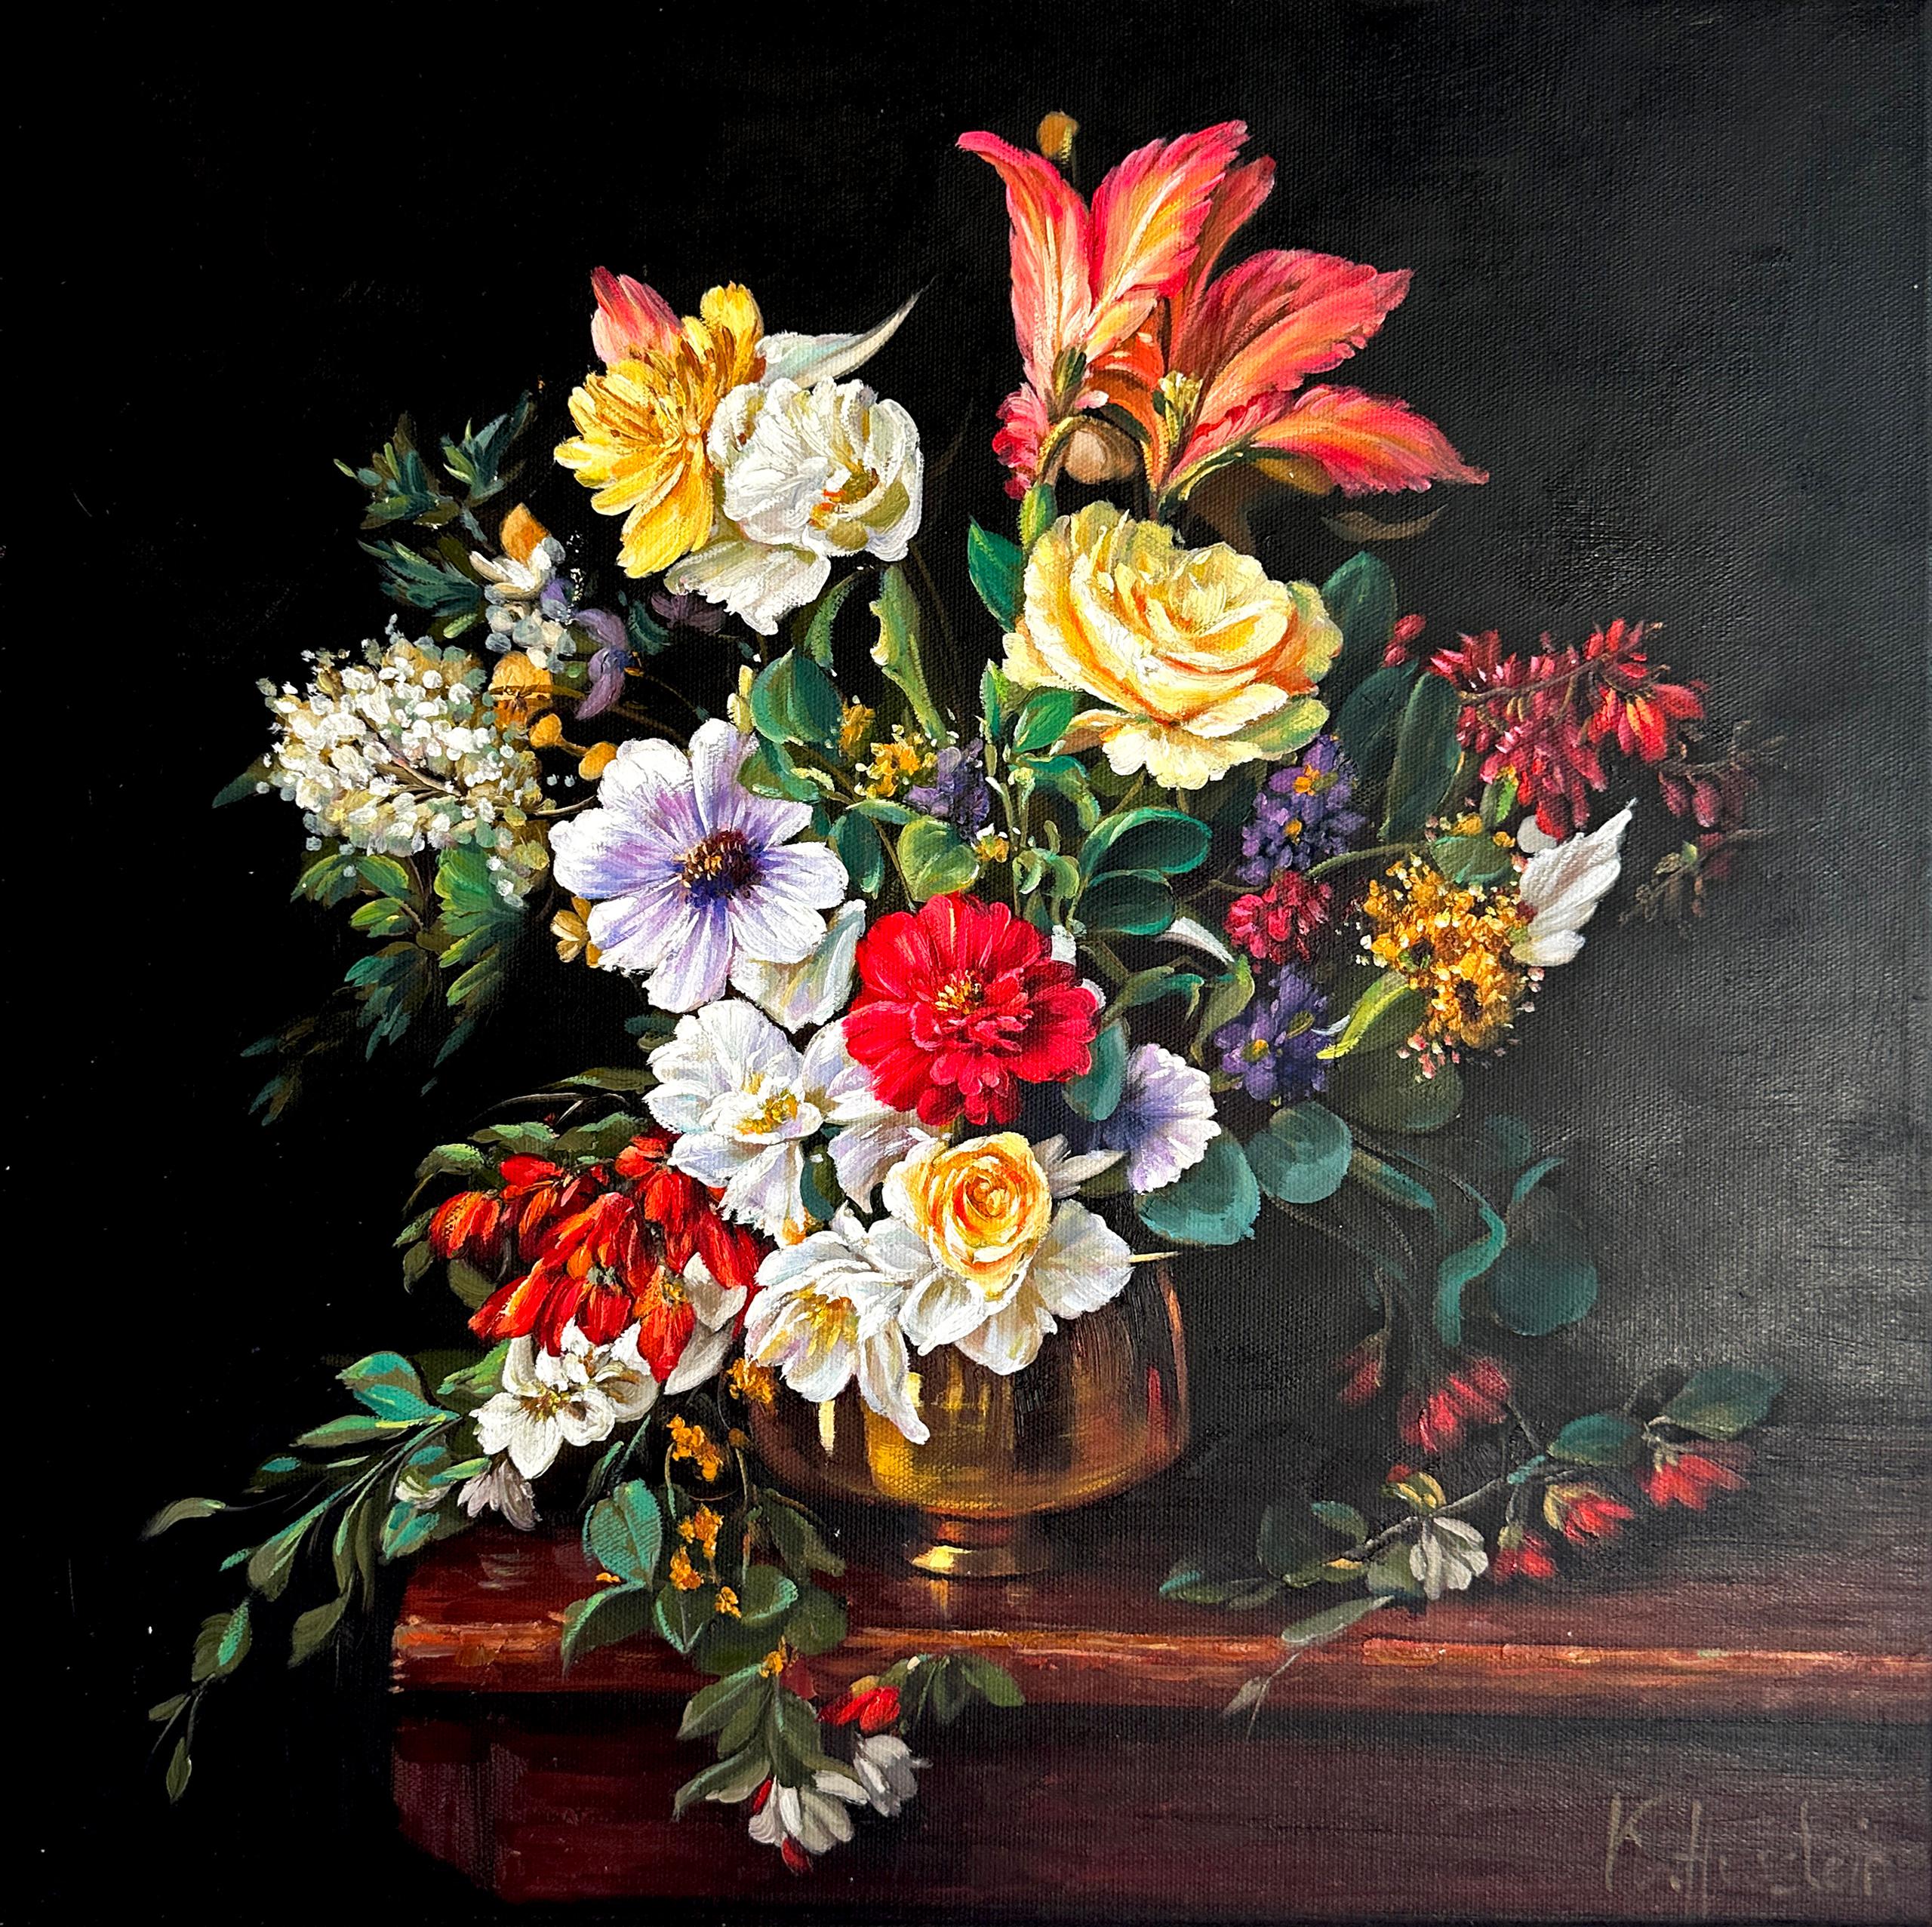 The Head does its best but the heart is the boss.

This is a beautiful oil painting of an array of flowers in a vase in front of a dark background.
Reminding us of old master paintings, this is a brand new painting full elegance and timeless